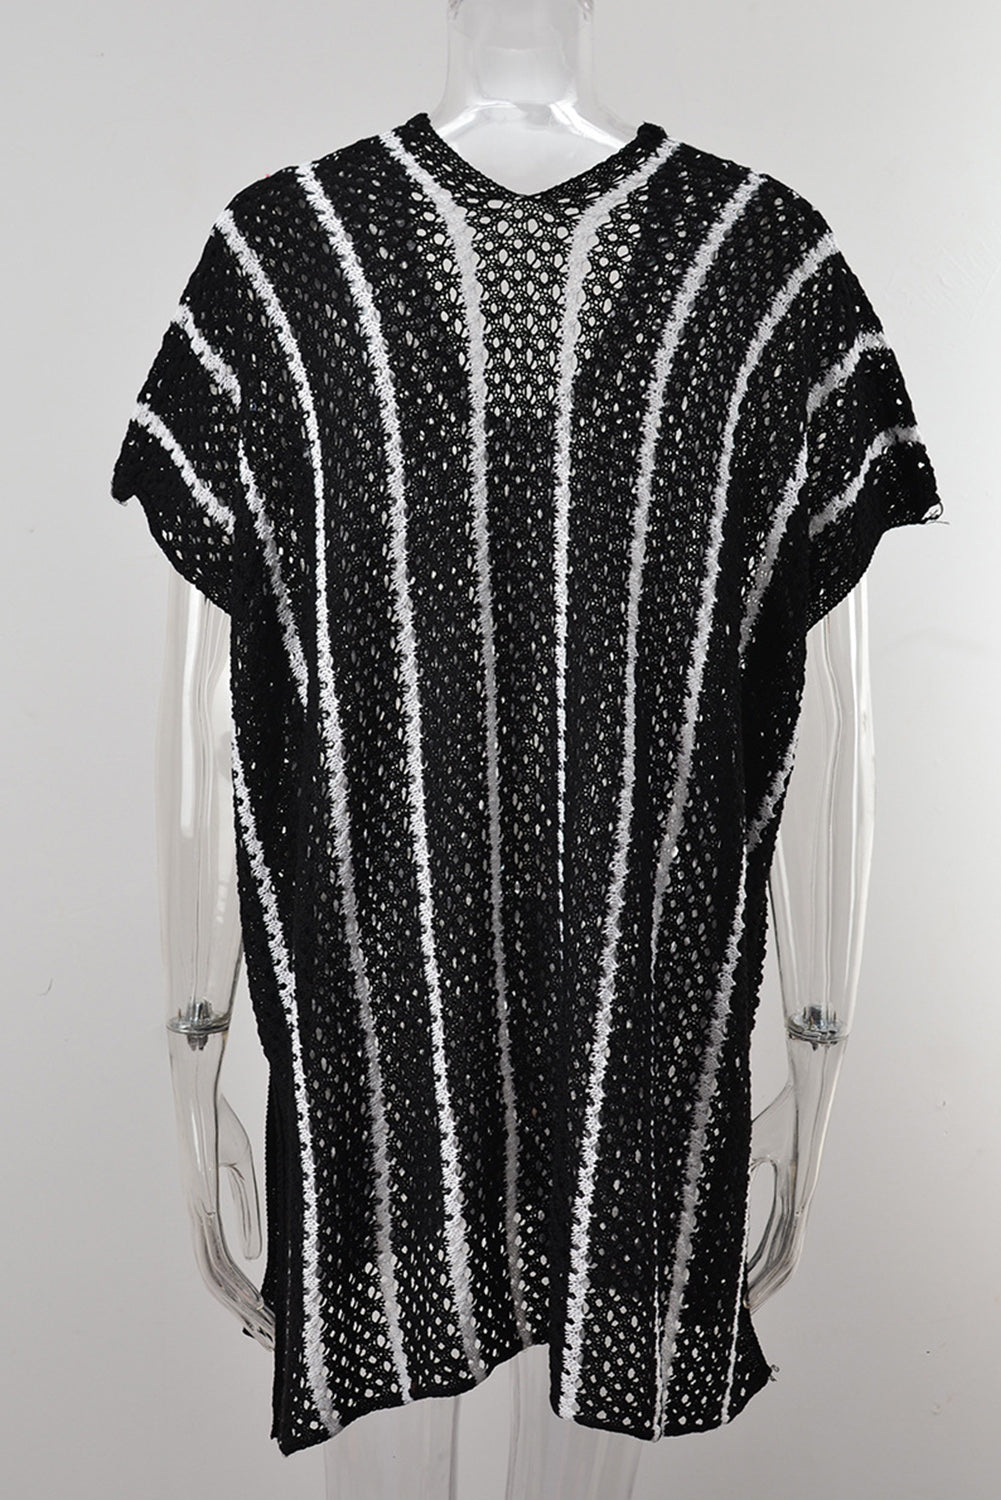 Black Striped Crochet Loose Fit V Neck Beach Cover Up